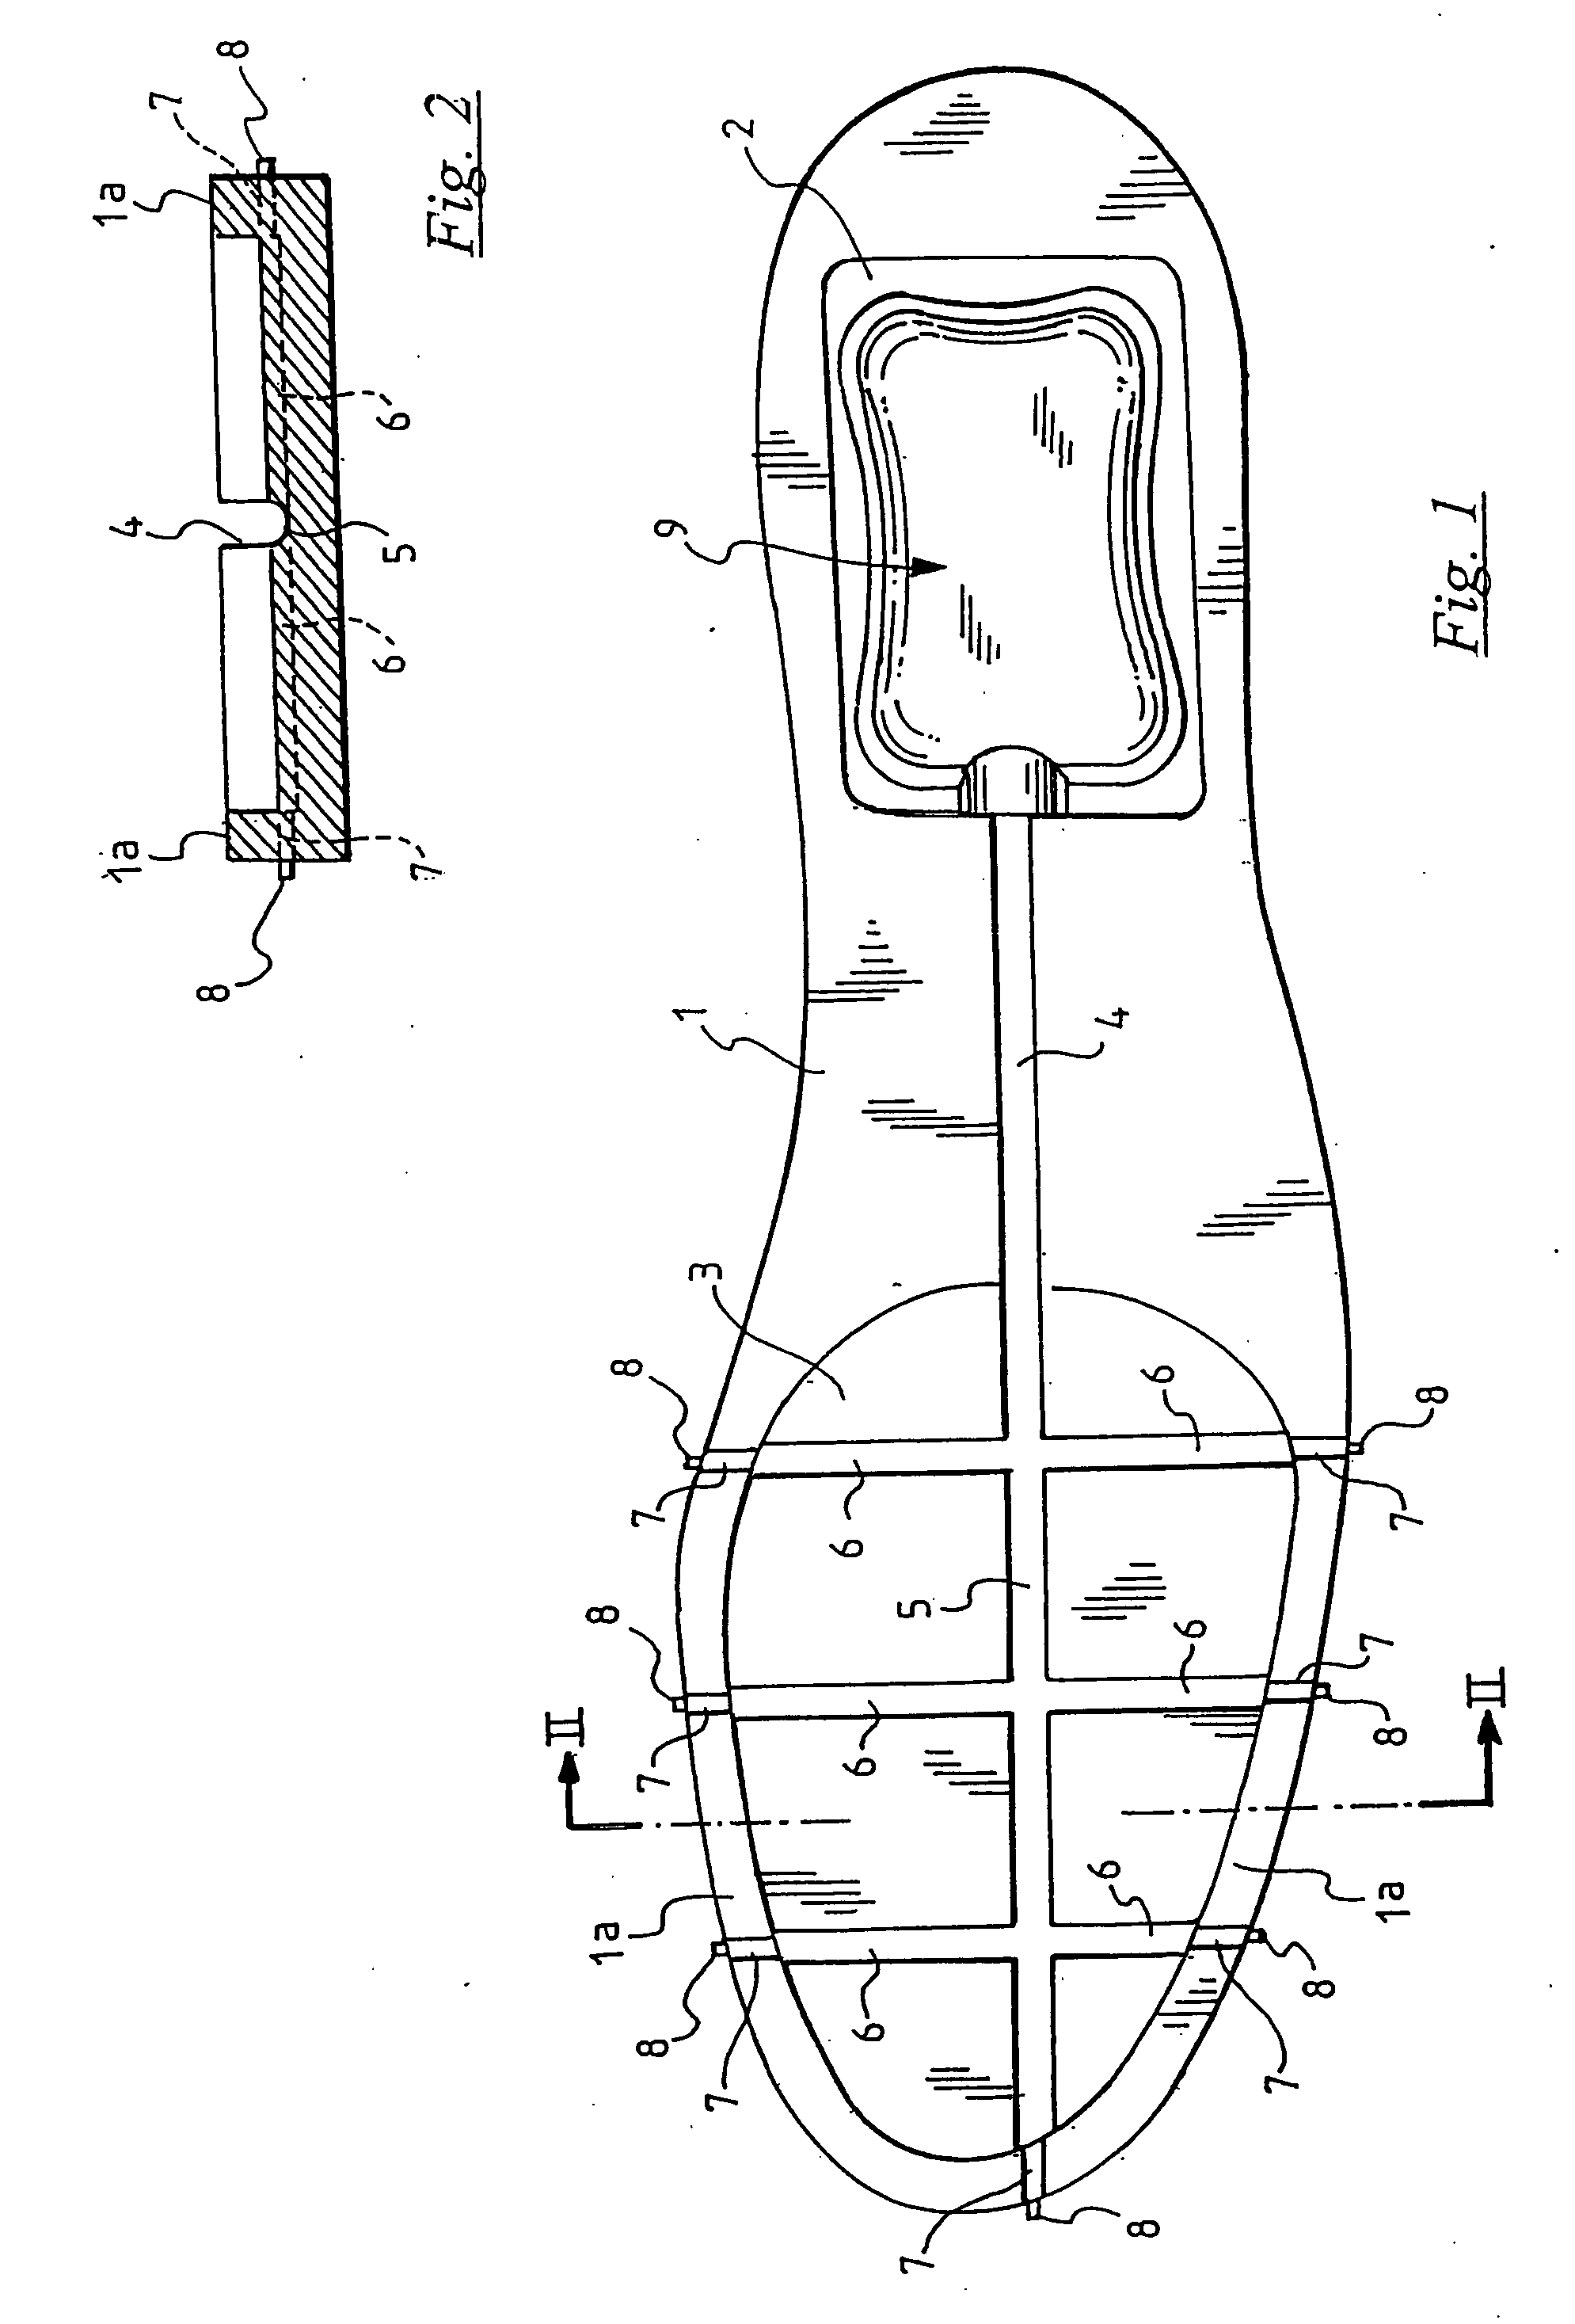 Aeration system and device for shoes